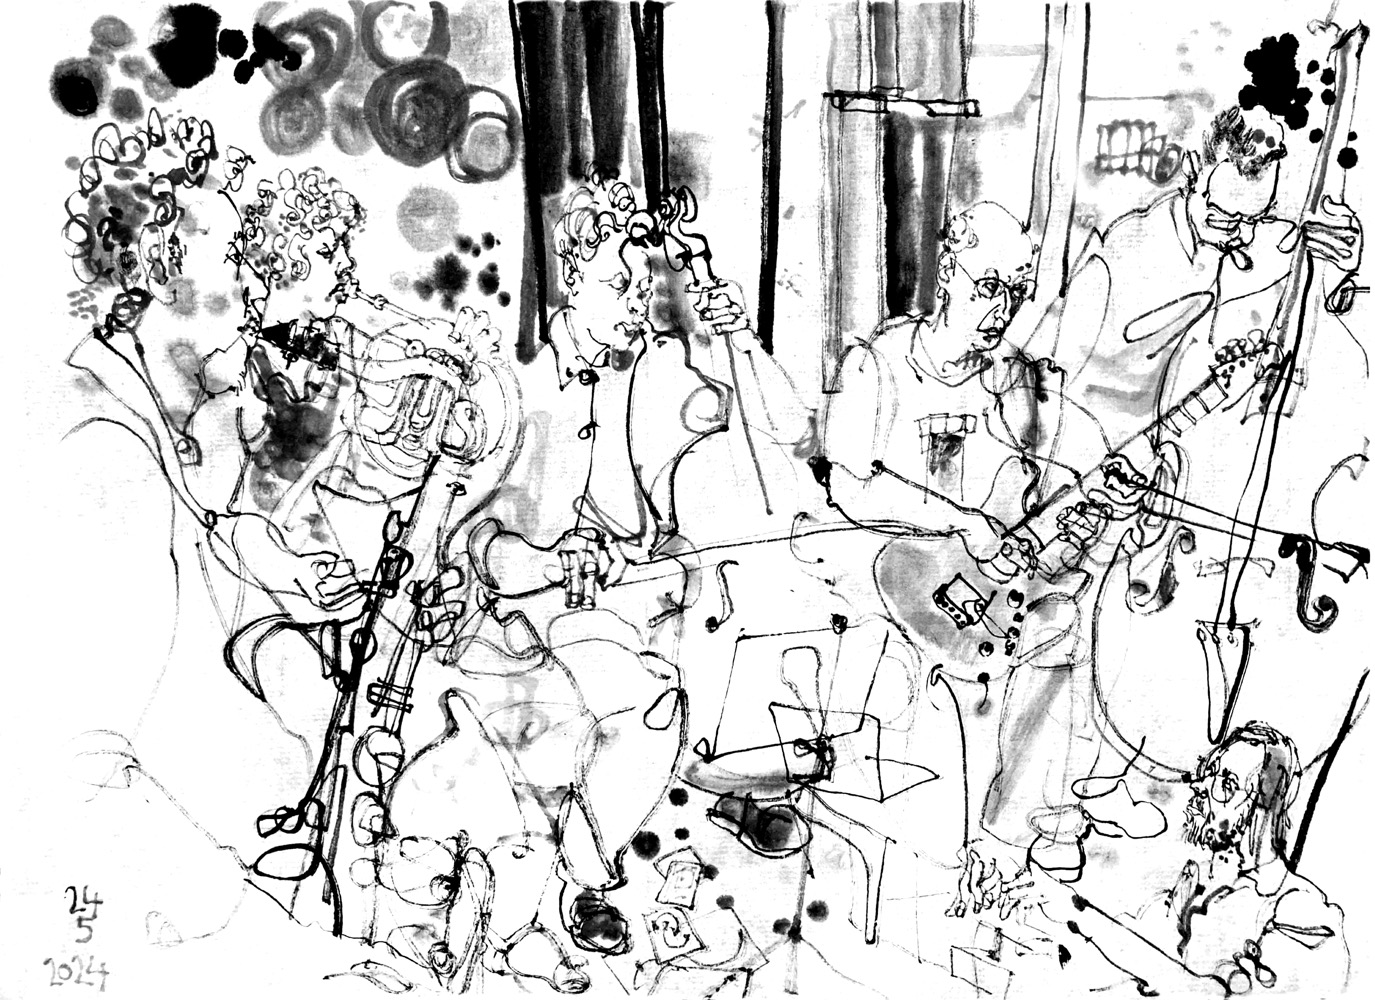 Ink drawing of six musicians